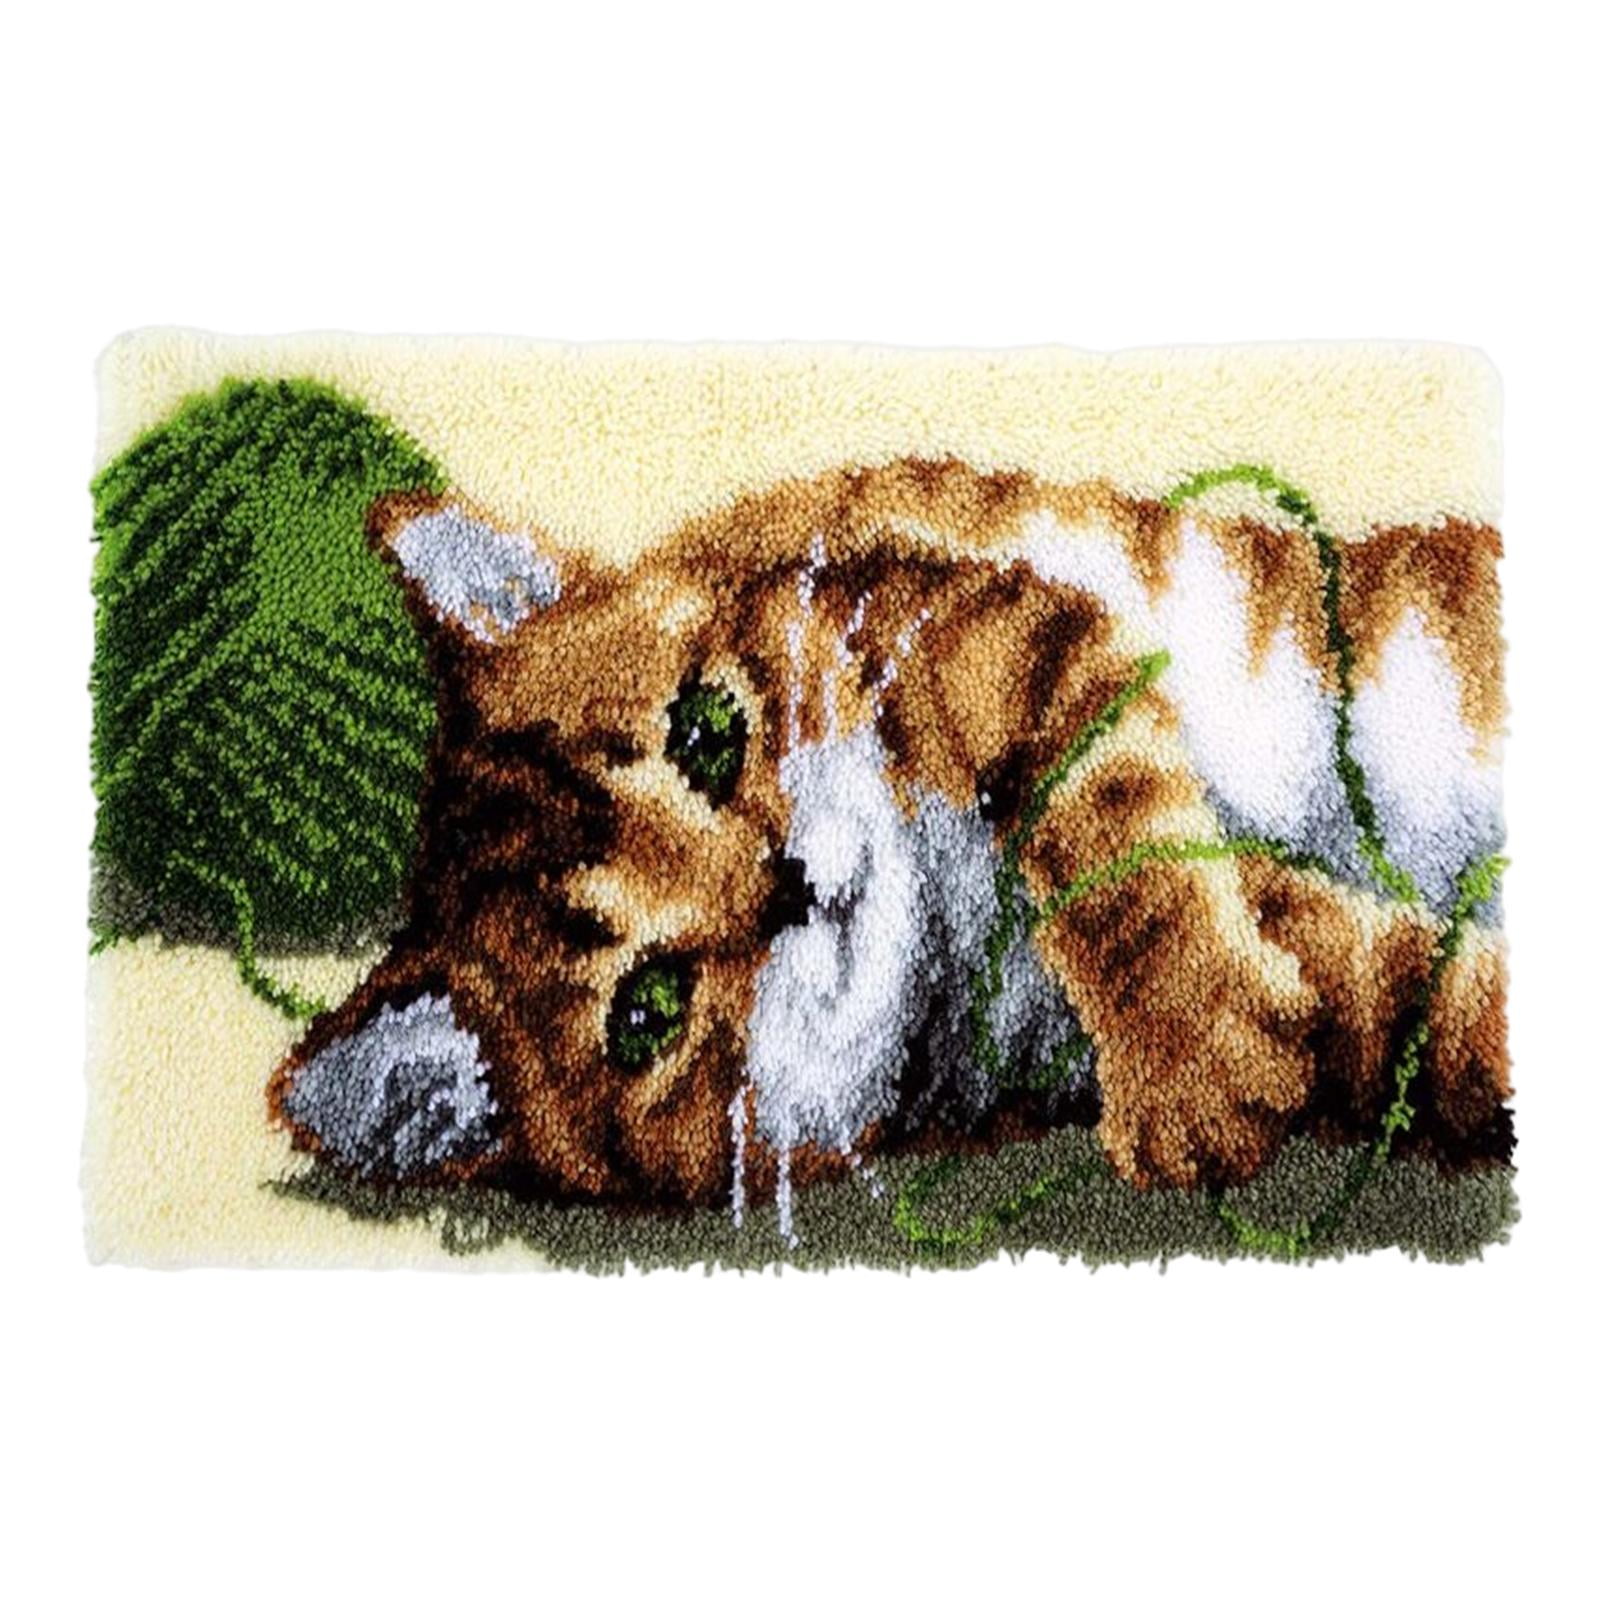  EsLuker.ly Latch Hook Rug Kits DIY Crochet Carpet Cats Patterns  Pre-Printed Canvas Yarn Rug Embroidery Crafting Arts for Adults Kids (Bule)